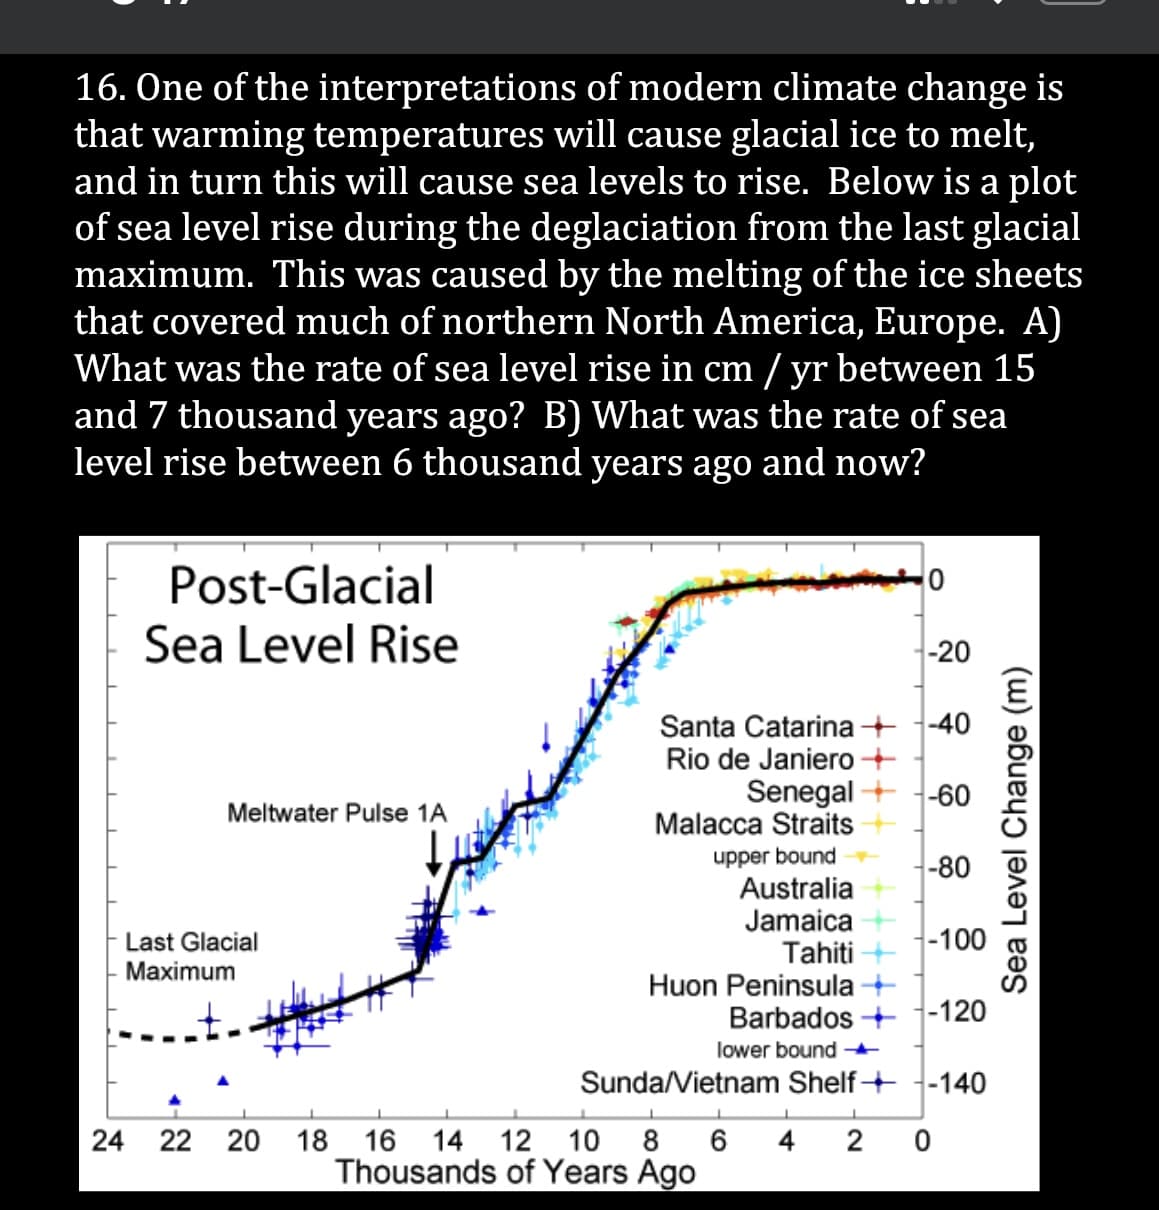 16. One of the interpretations of modern climate change is
that warming temperatures will cause glacial ice to melt,
and in turn this will cause sea levels to rise. Below is a plot
of sea level rise during the deglaciation from the last glacial
maximum. This was caused by the melting of the ice sheets
that covered much of northern North America, Europe. A)
What was the rate of sea level rise in cm / yr between 15
and 7 thousand years ago? B) What was the rate of sea
level rise between 6 thousand years ago and now?
0
Post-Glacial
Sea Level Rise
-20
Santa Catarina + --40
Rio de Janiero +
Senegal -60
Meltwater Pulse 1A
Malacca Straits
upper bound
-80
Australia
Jamaica
-100
Tahiti
Huon Peninsula →
Barbados
-120
lower bound
Sunda/Vietnam Shelf
-140
↓
1
1
20 18 16 14 12 10 8 6 4 2 0
Thousands of Years Ago
Last Glacial
Maximum
24 22
Sea Level Change (m)